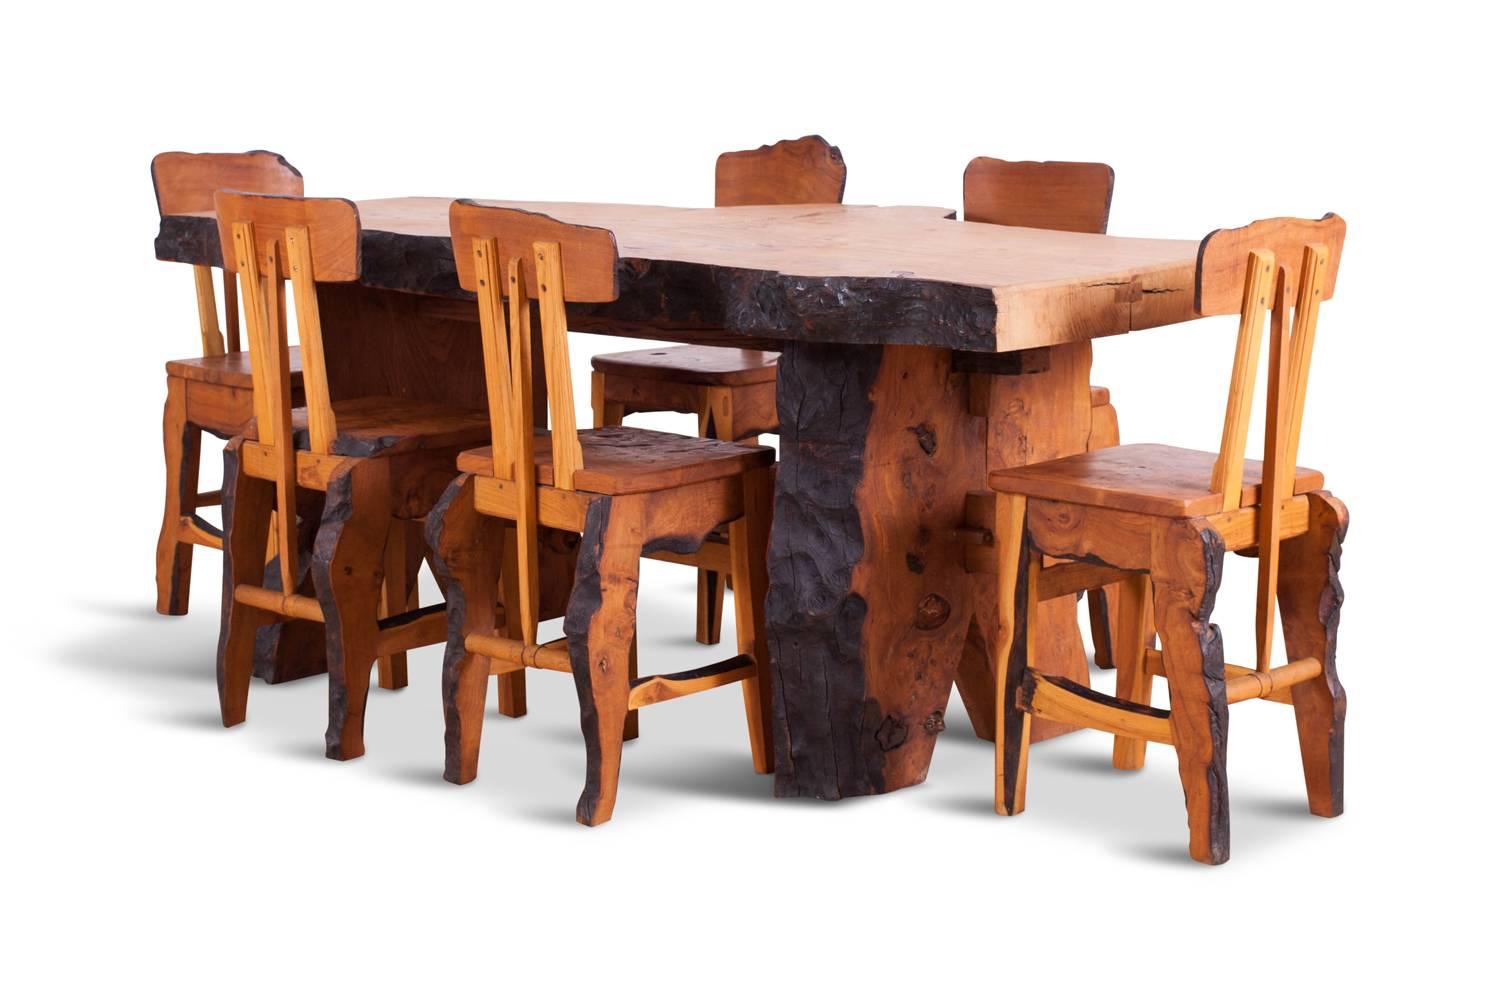 Folk Art wabi sabi dining set in French elm (extinct)
matching table and chairs custom designed in an Atelier Français in the 1960s
Artisanal character gives a very personal feel and soul to your interior.
An ideal set for an eclectic